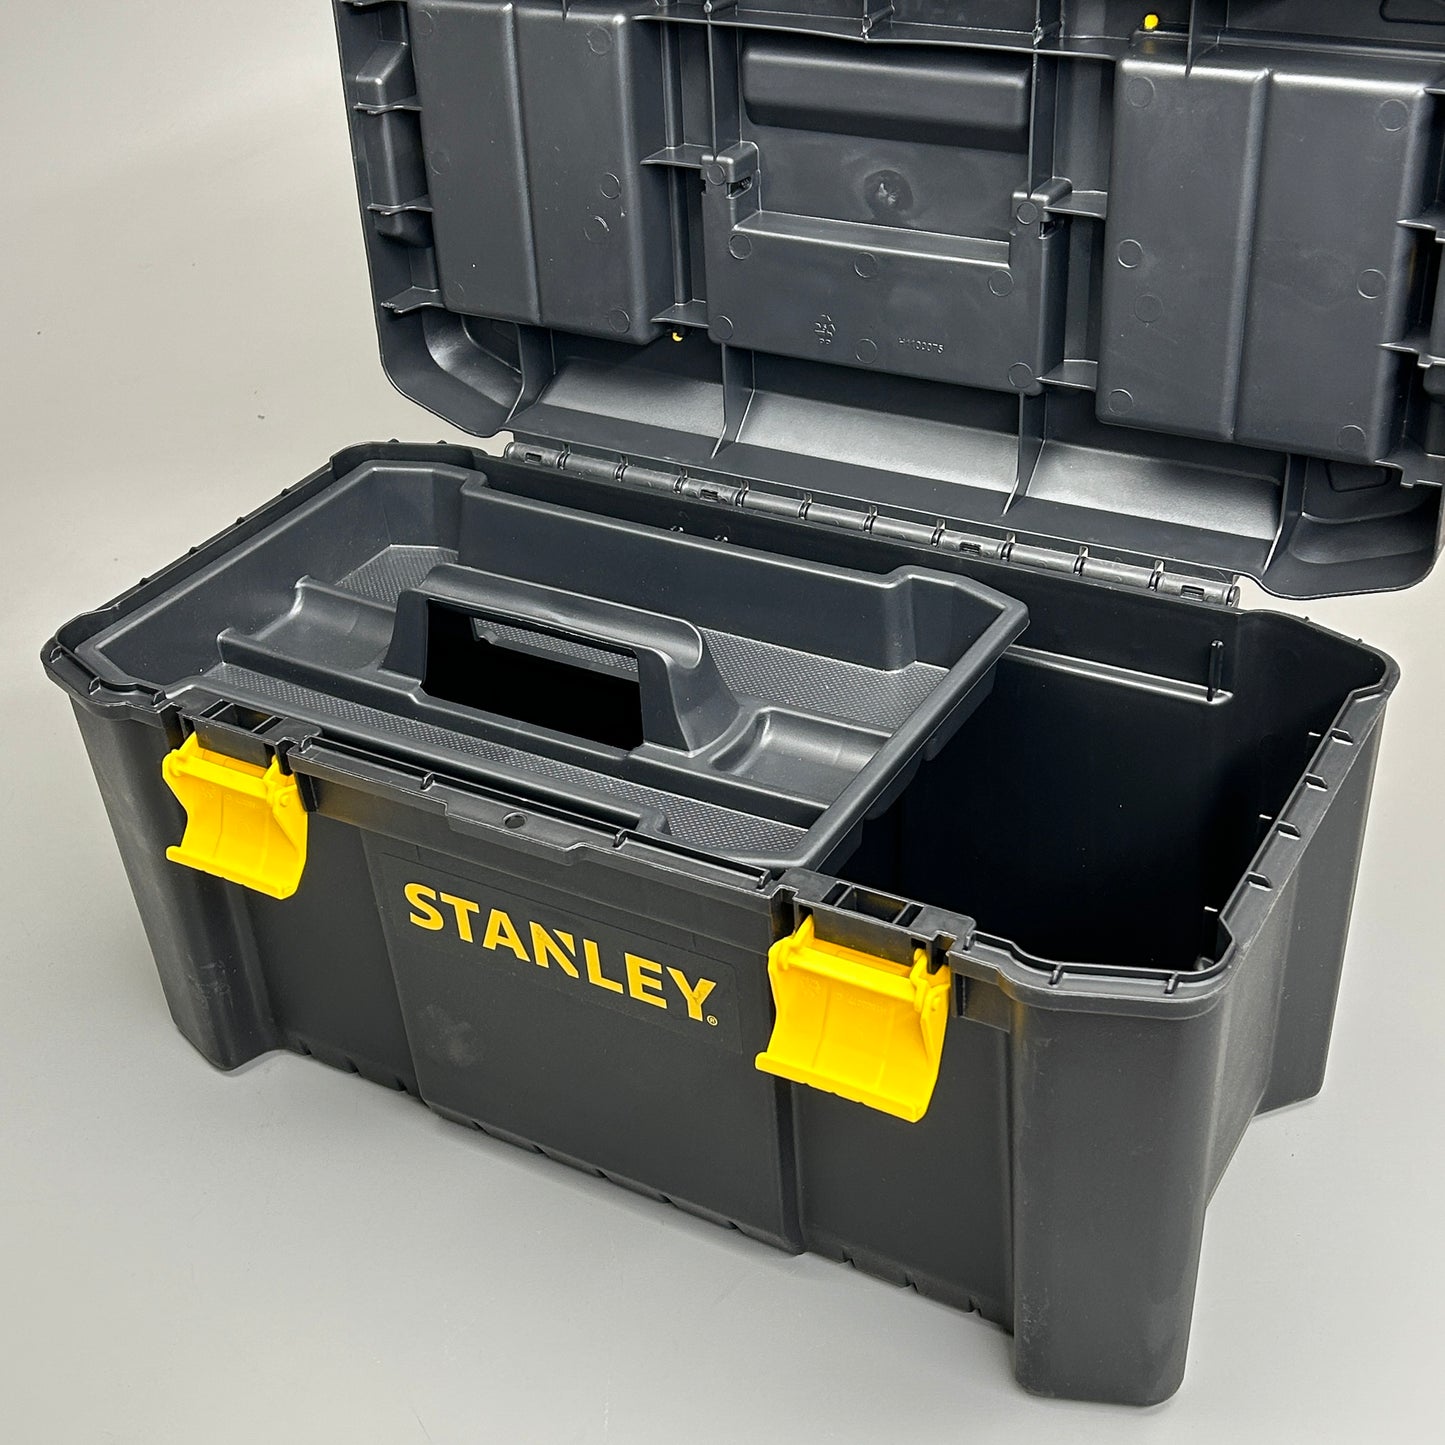 STANLEY 19" Essential Toolbox With Lid Organizers Black/Yellow STST19331 (New)